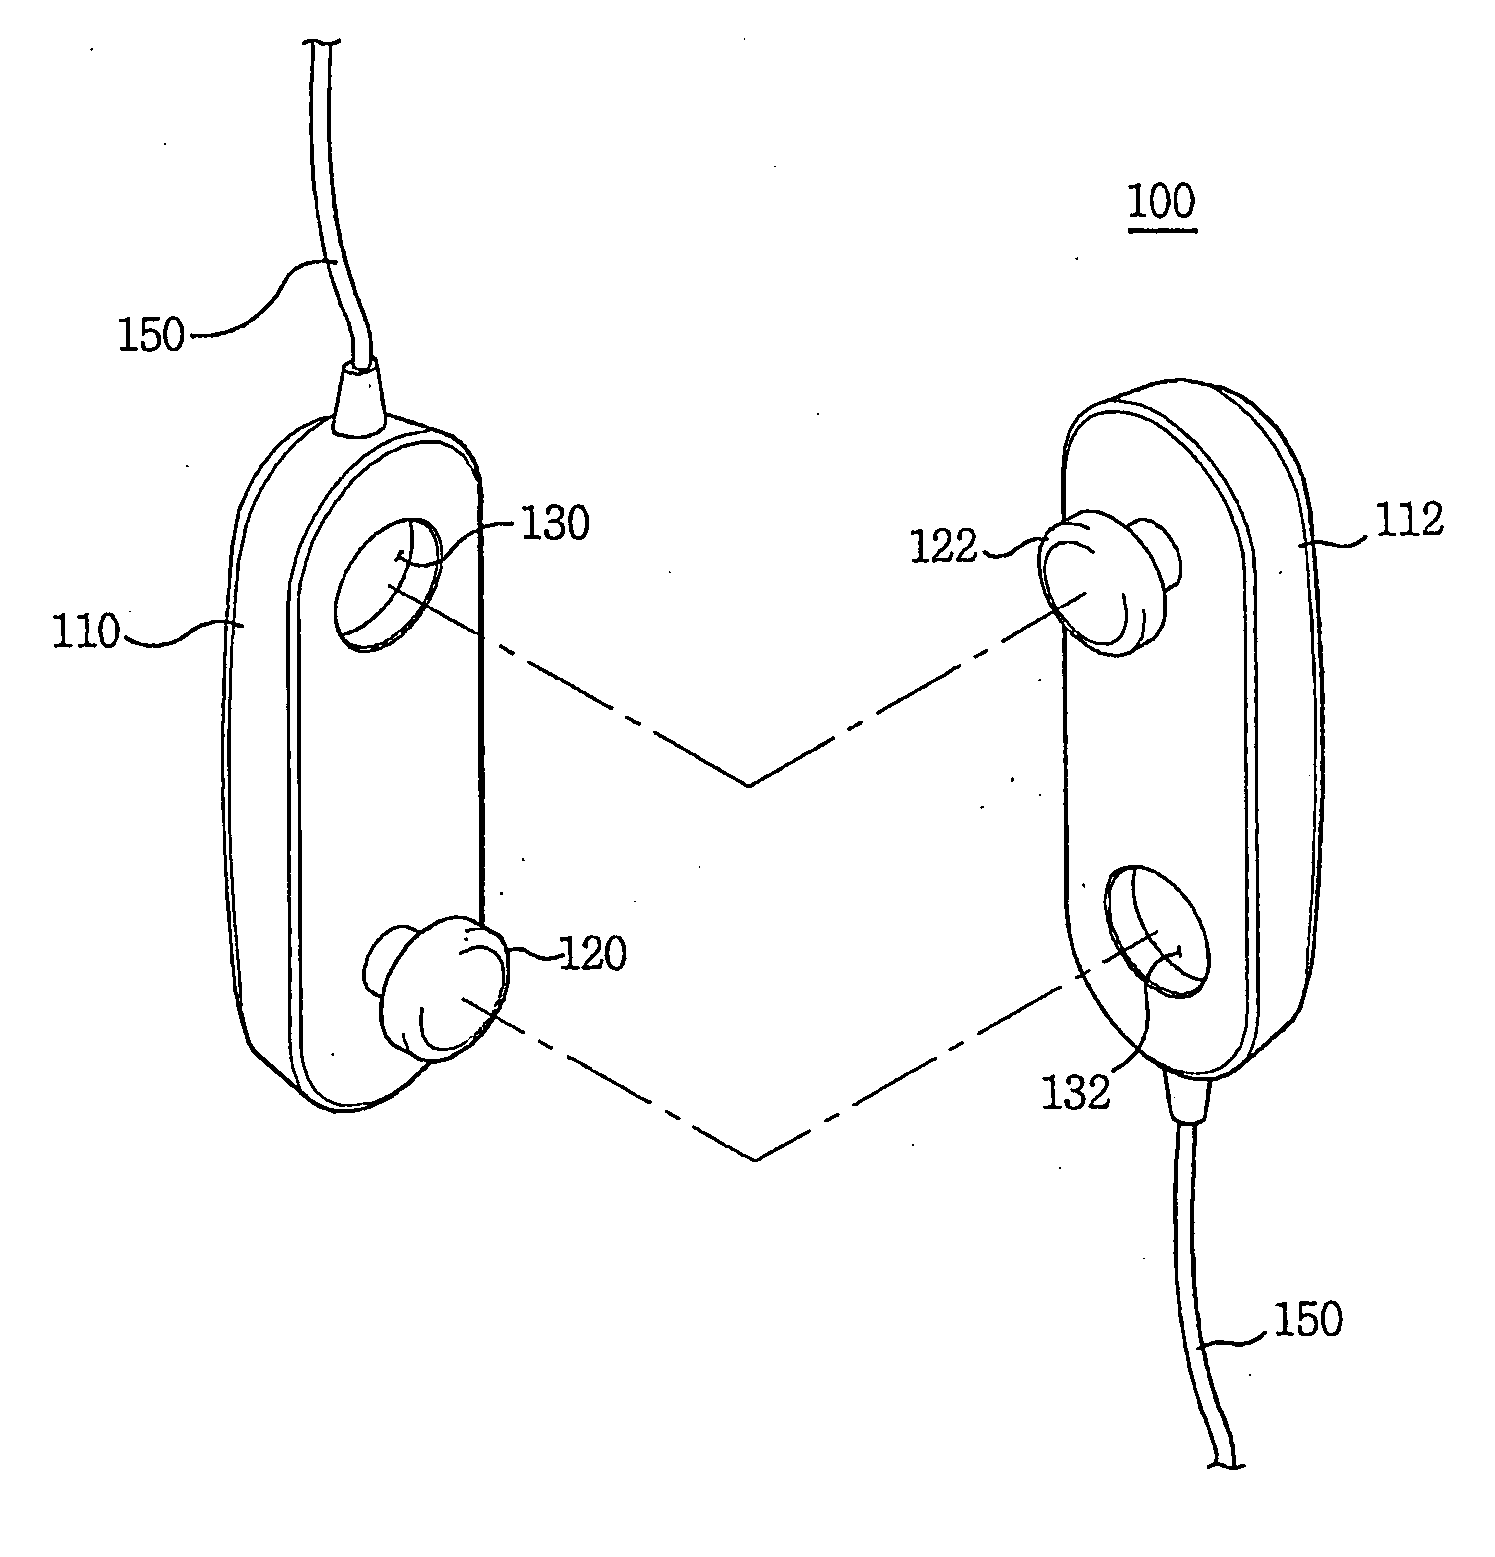 Apparatus for Necklace Type Radio Headset